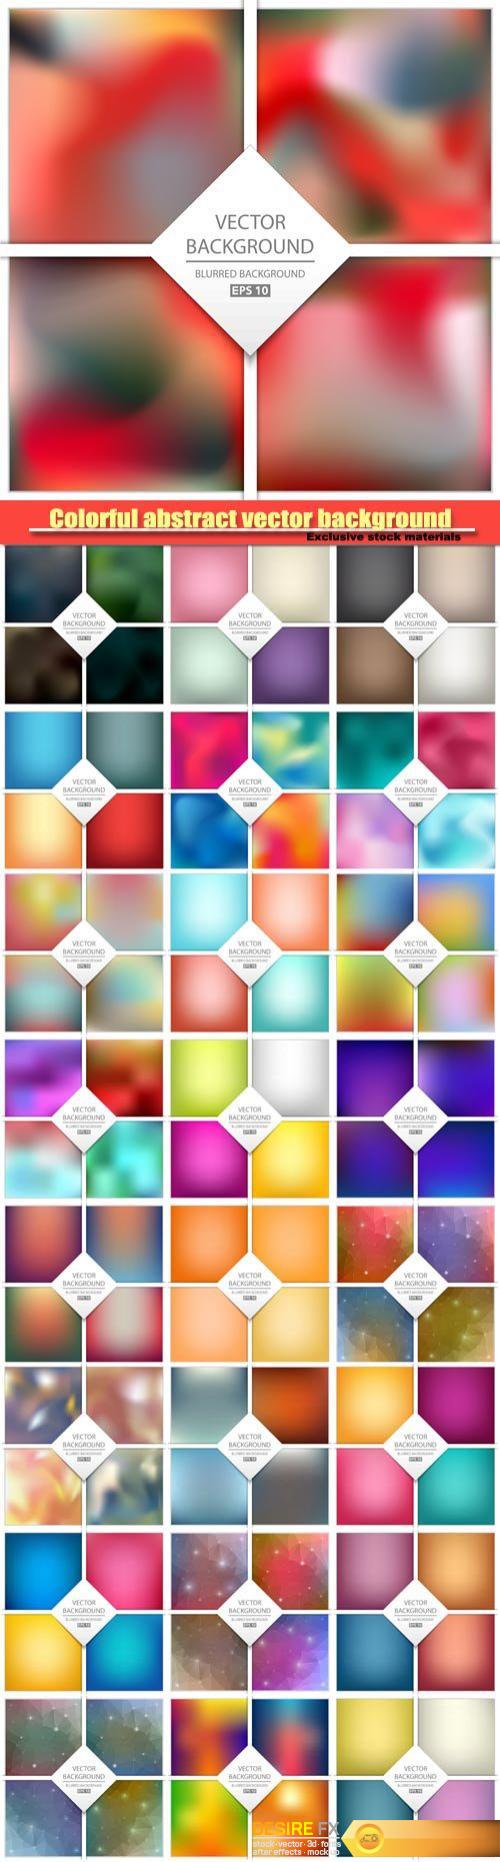 Multicolored abstract vector background, art illustration template design